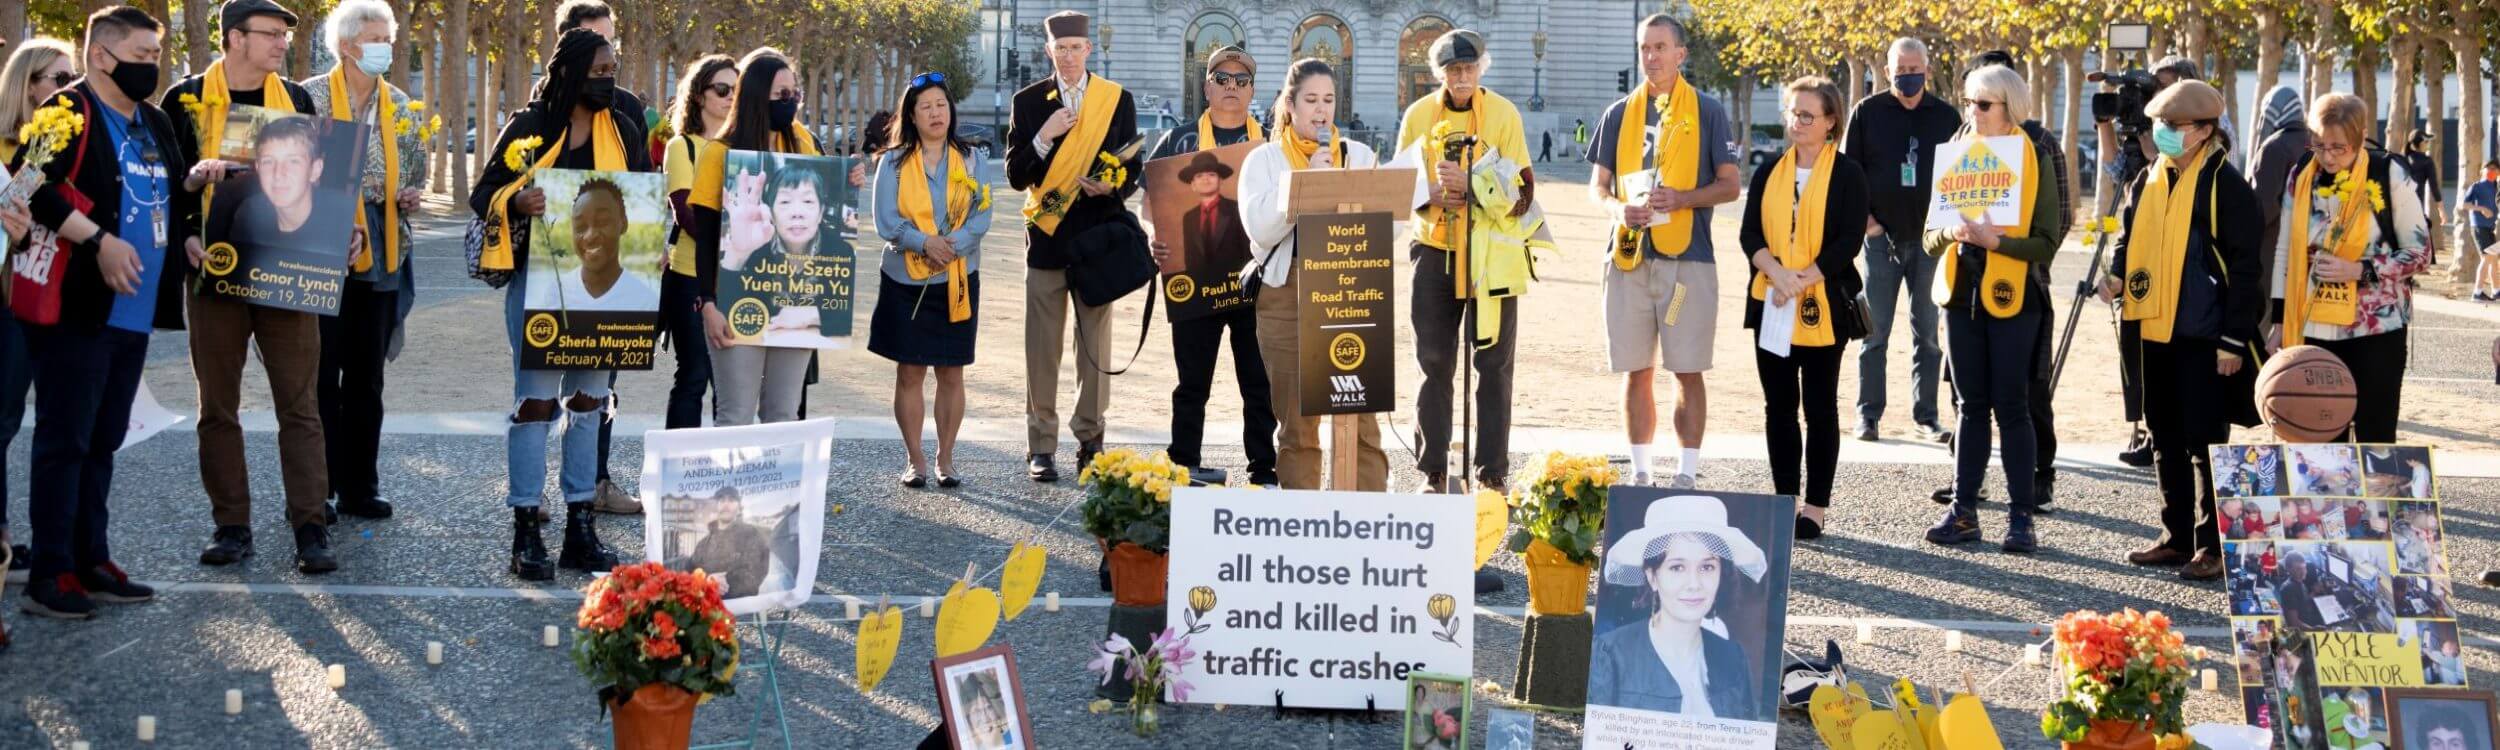 Bringing voice to victims and demanding safer streets at World Day of Remembrance